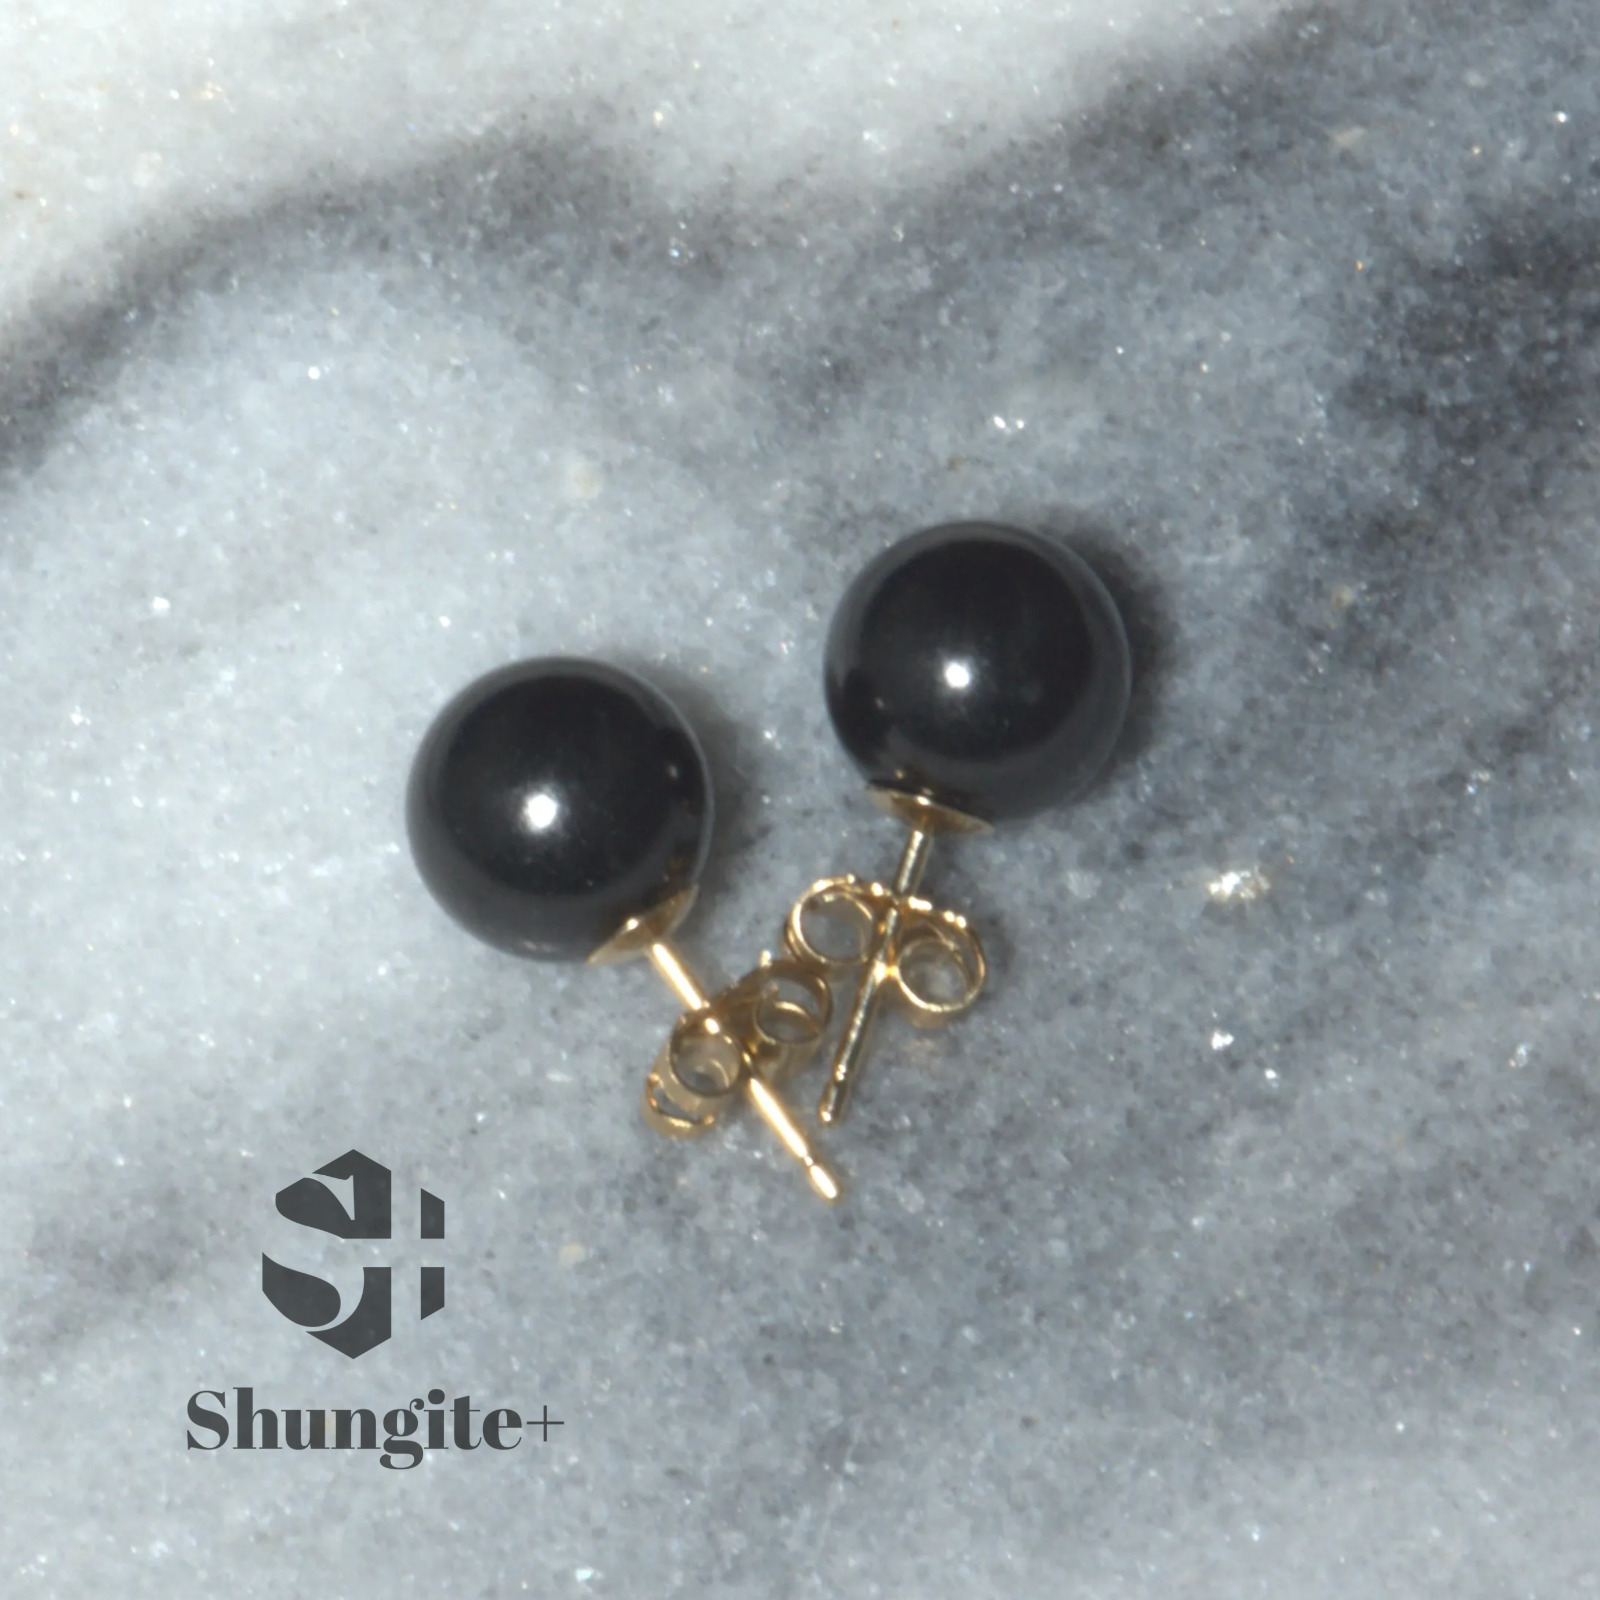 Shungite Stud Earrings in 9ct Solid Gold